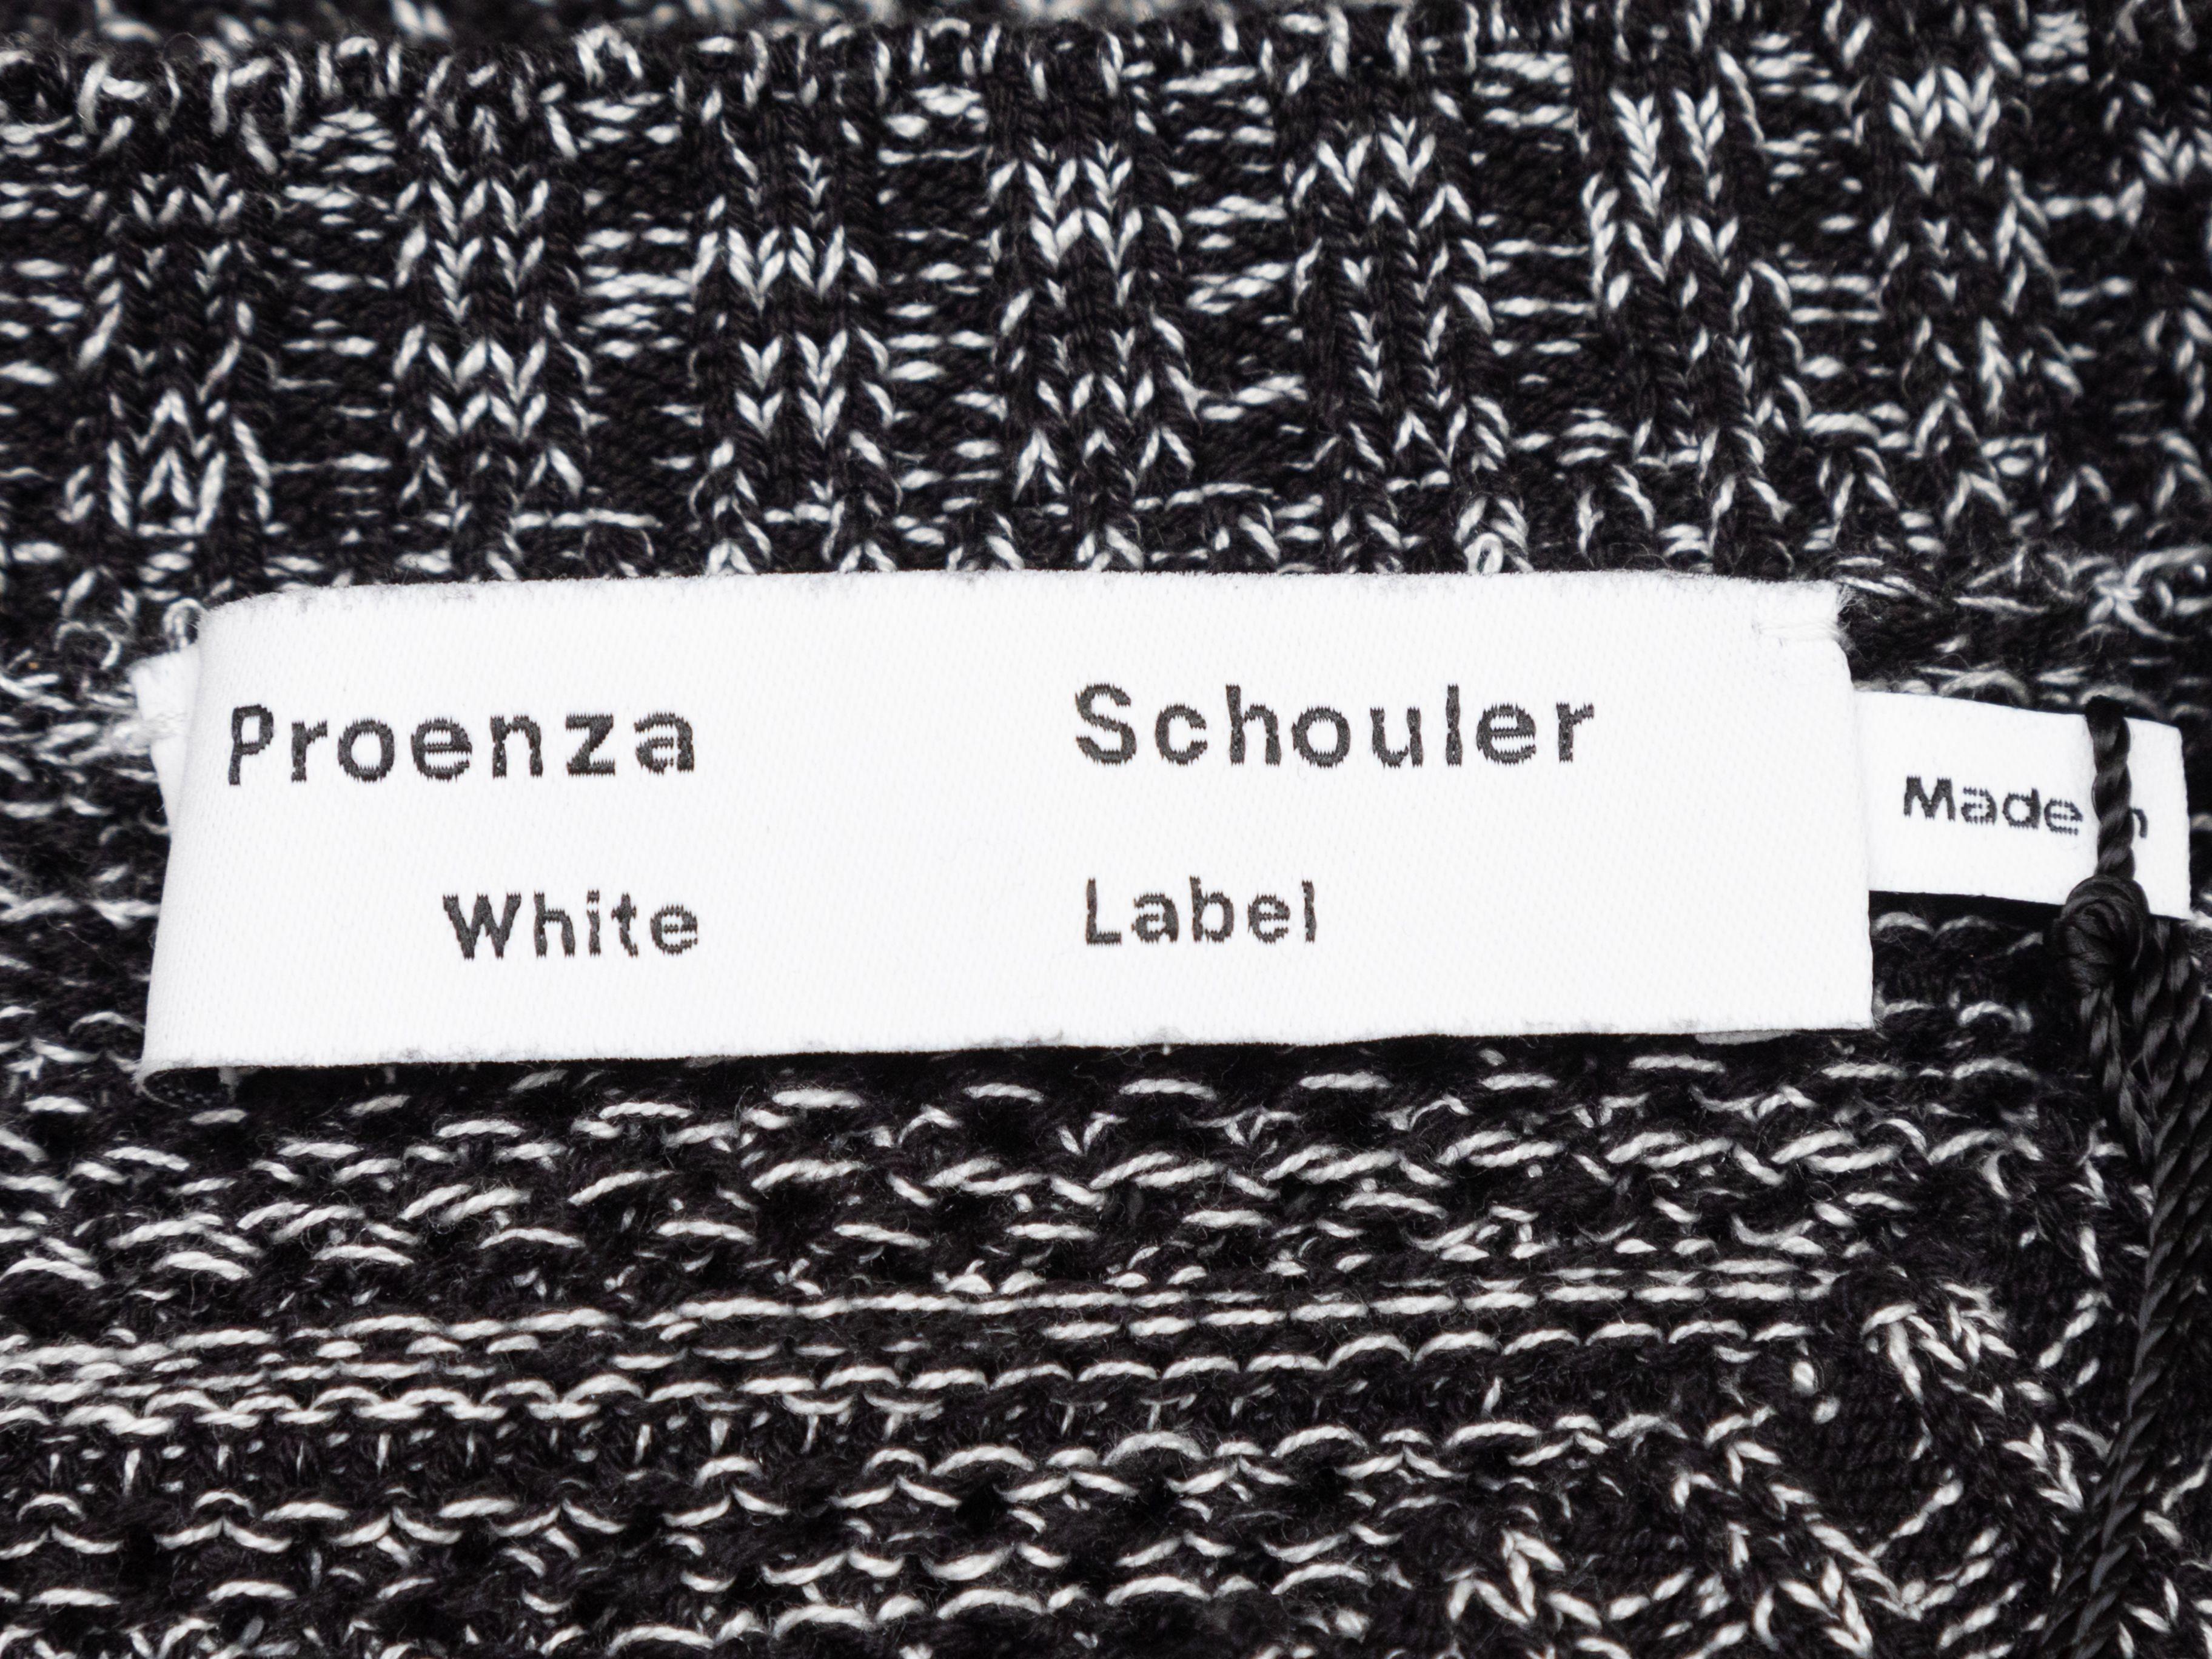 Product Details: Black and white silk-blend melange knit sweater by Proenza Schouler. Crew neck. Long sleeves. 36